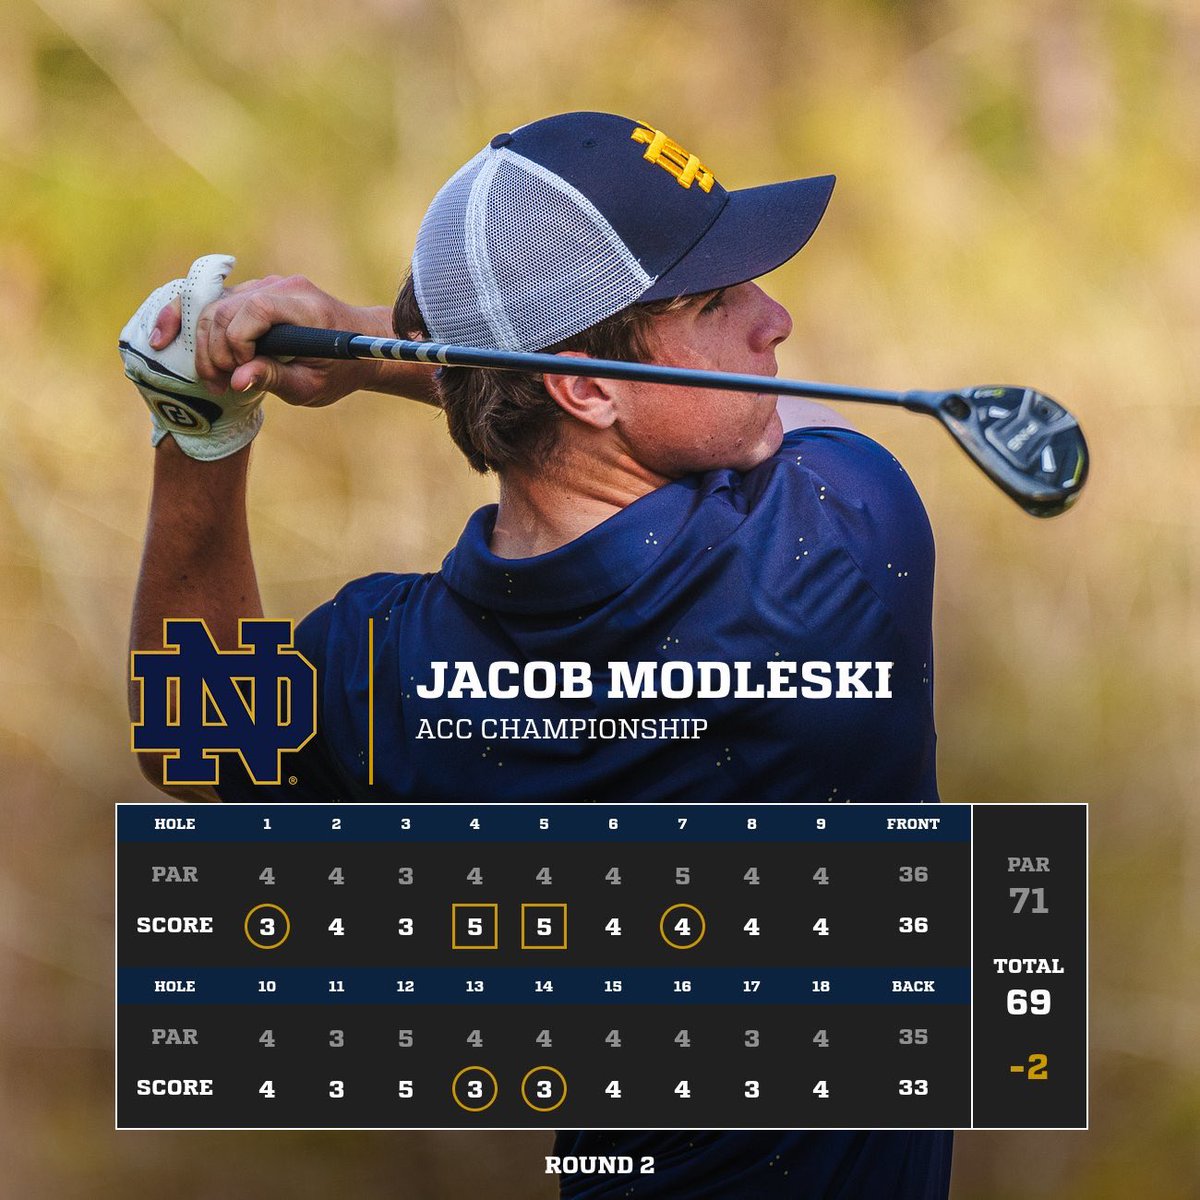 Second round of the ACC Championship is in the books. Palmer Jackson (grad) shot 68 (-3) and Jacob Modleski (freshmen) shot 69 (-2) to lead the way for the Irish. Tee times for tomorrow has moved up due to weather and the Irish are now scheduled to start at 8am. #GoIrish